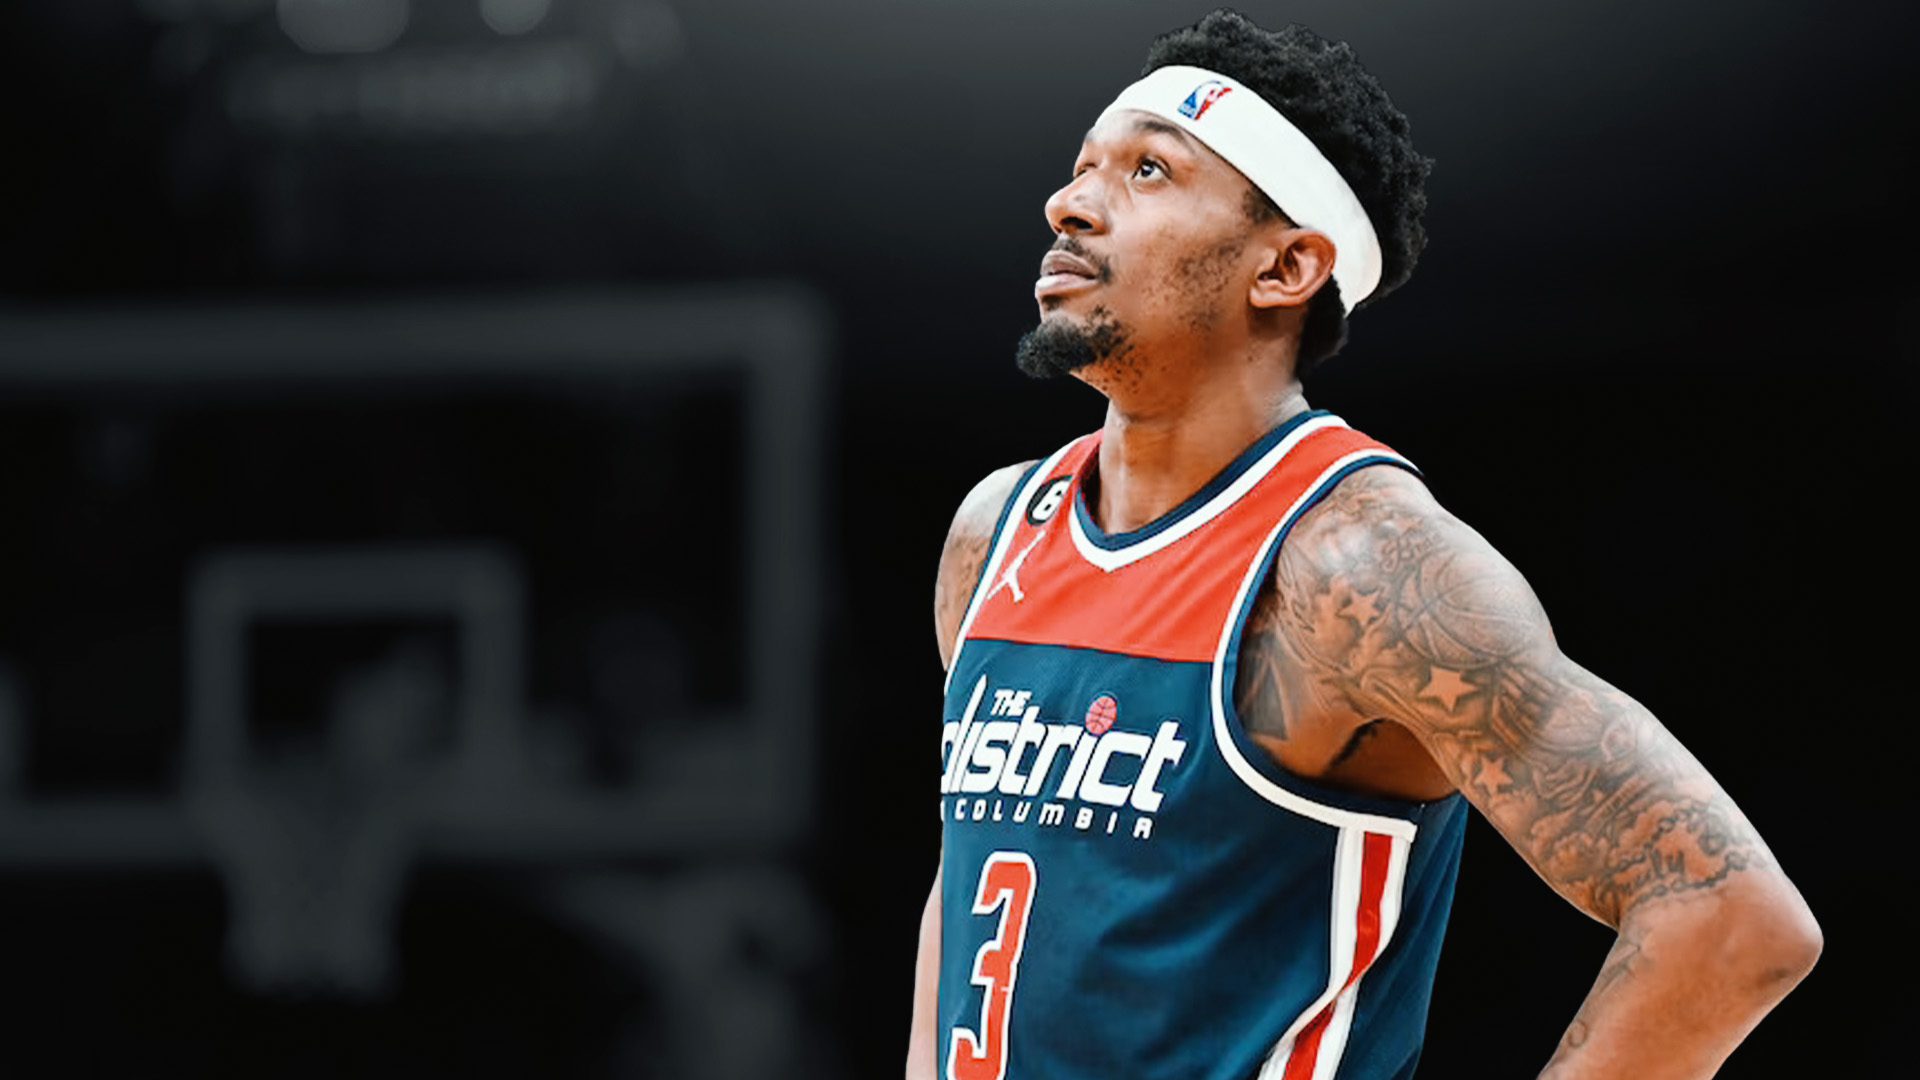 A Fan’s Lawsuit Against Bradley Beal For Assault Is Getting Ugly